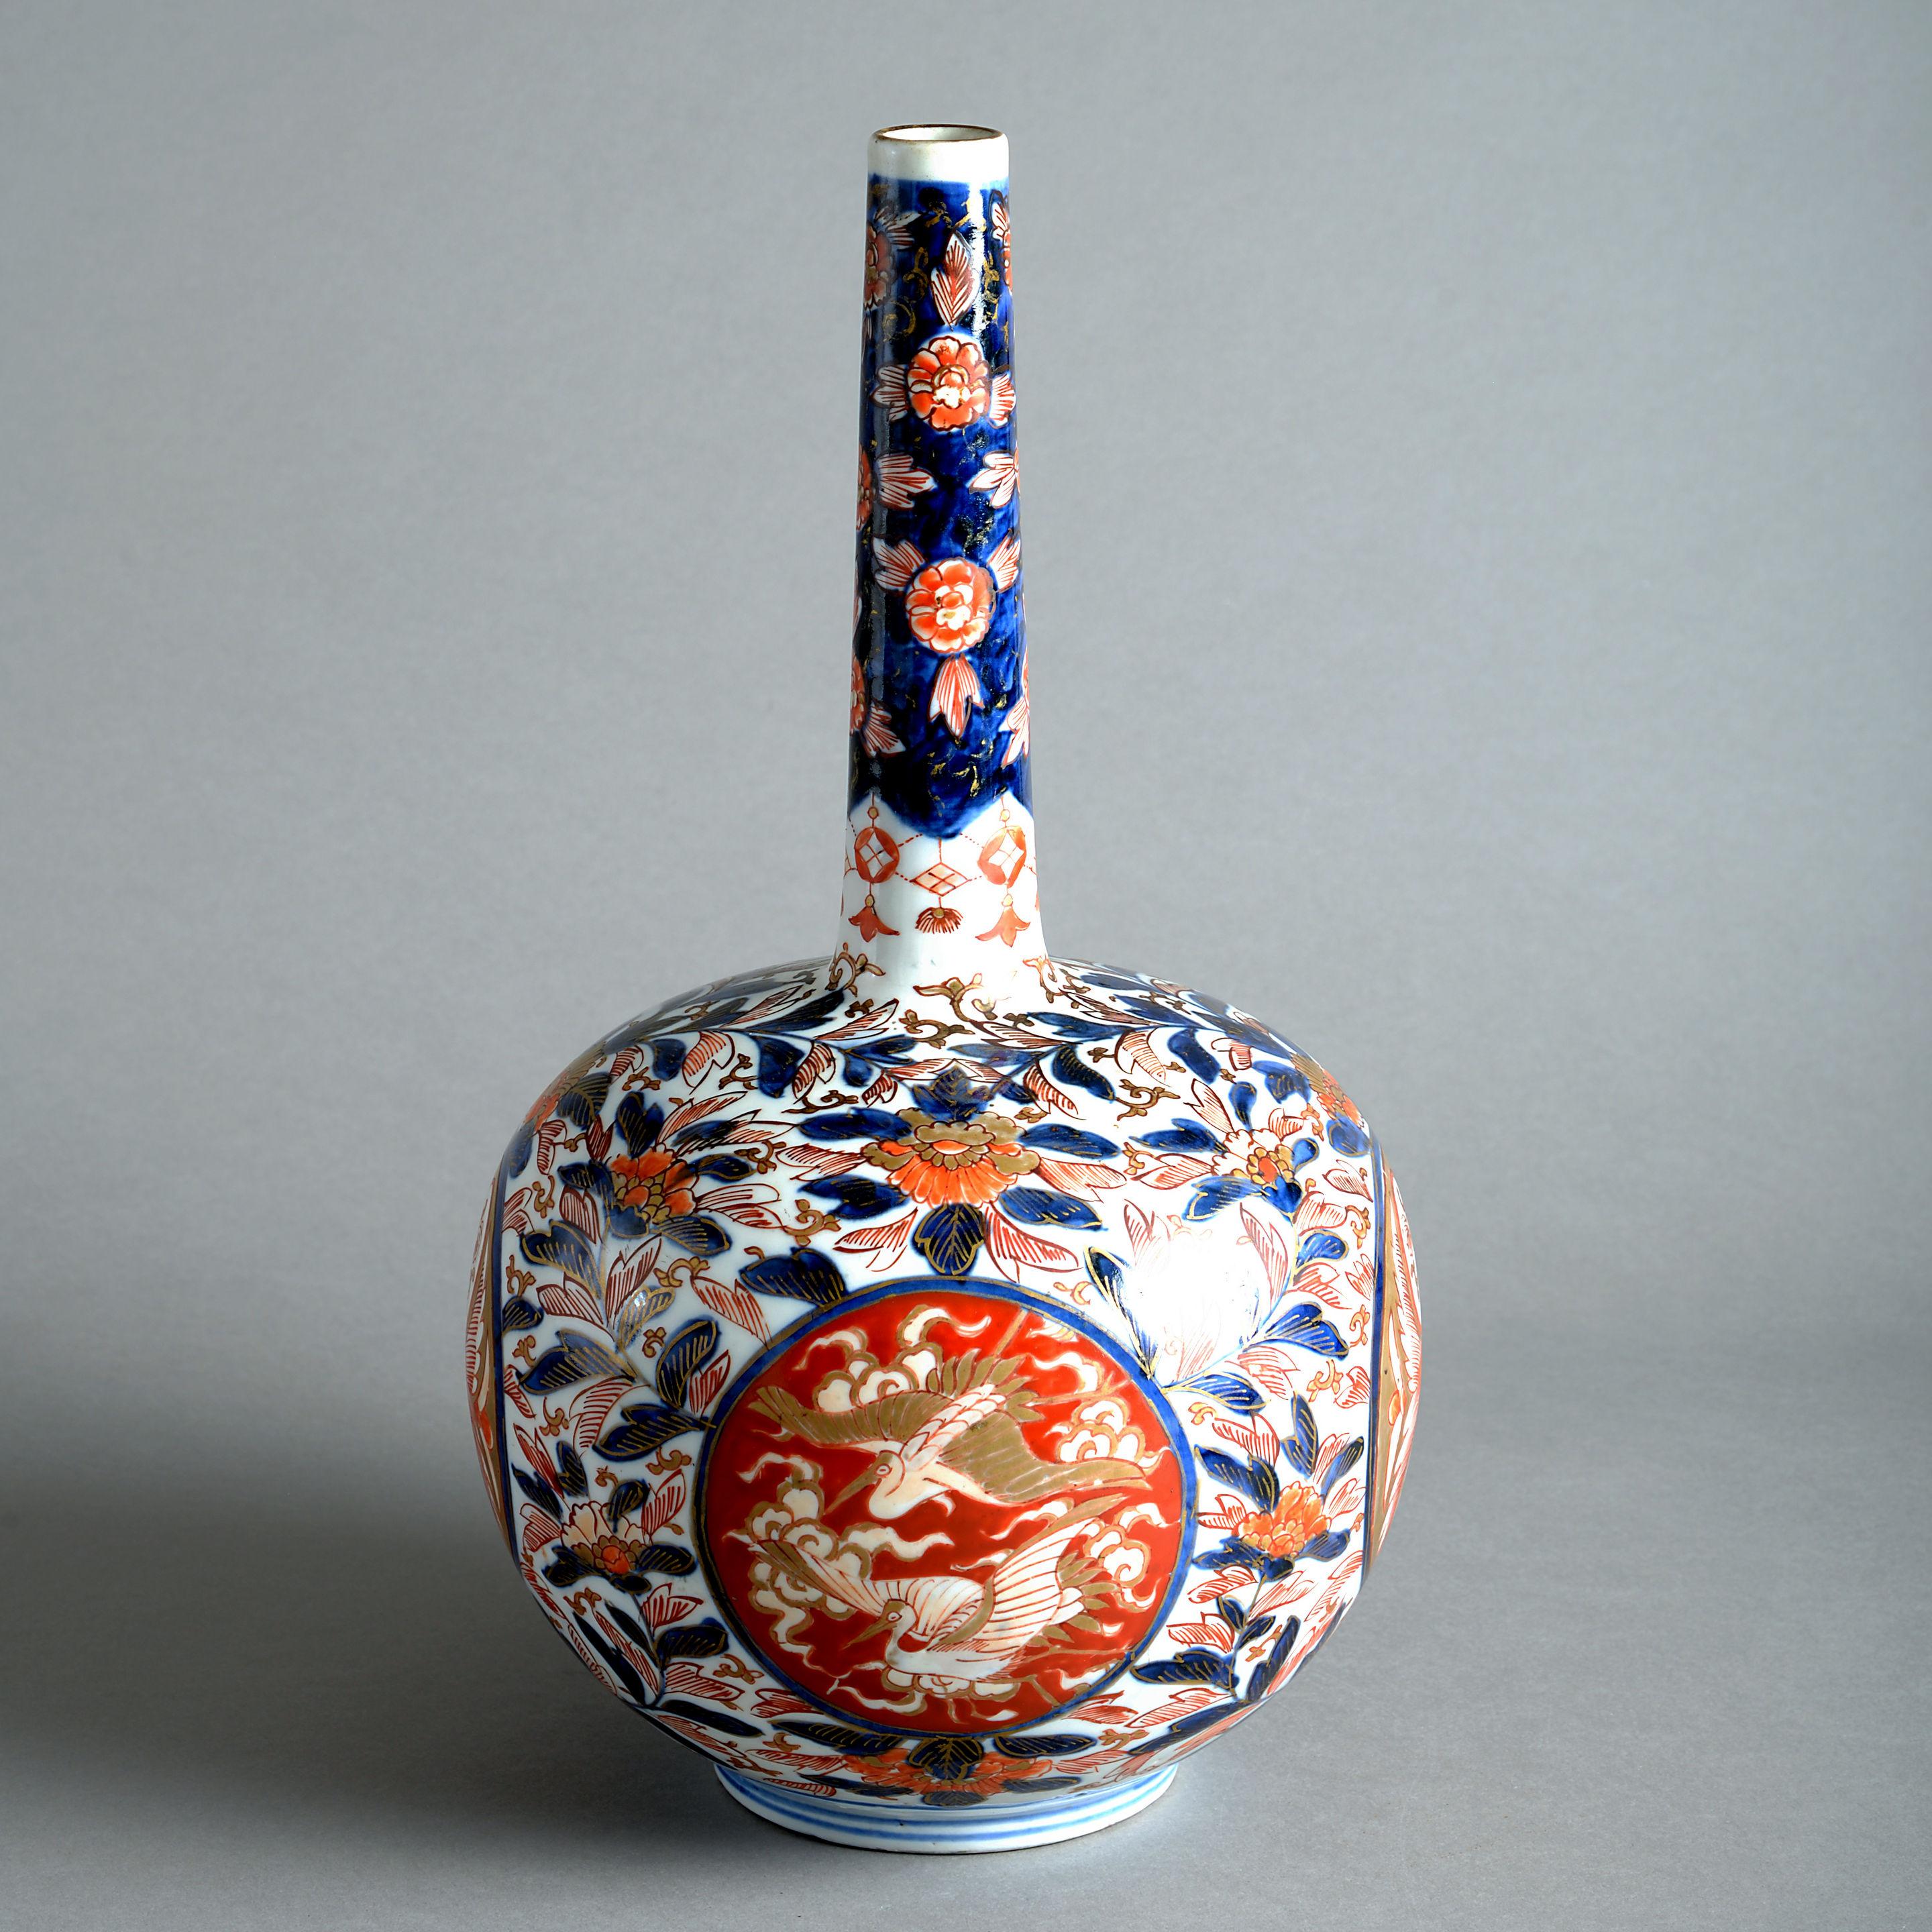 A fine late 19th century Imari porcelain bottle vase, decorated in the traditional manner with glazes in blue, red and gold upon a white ground.
  